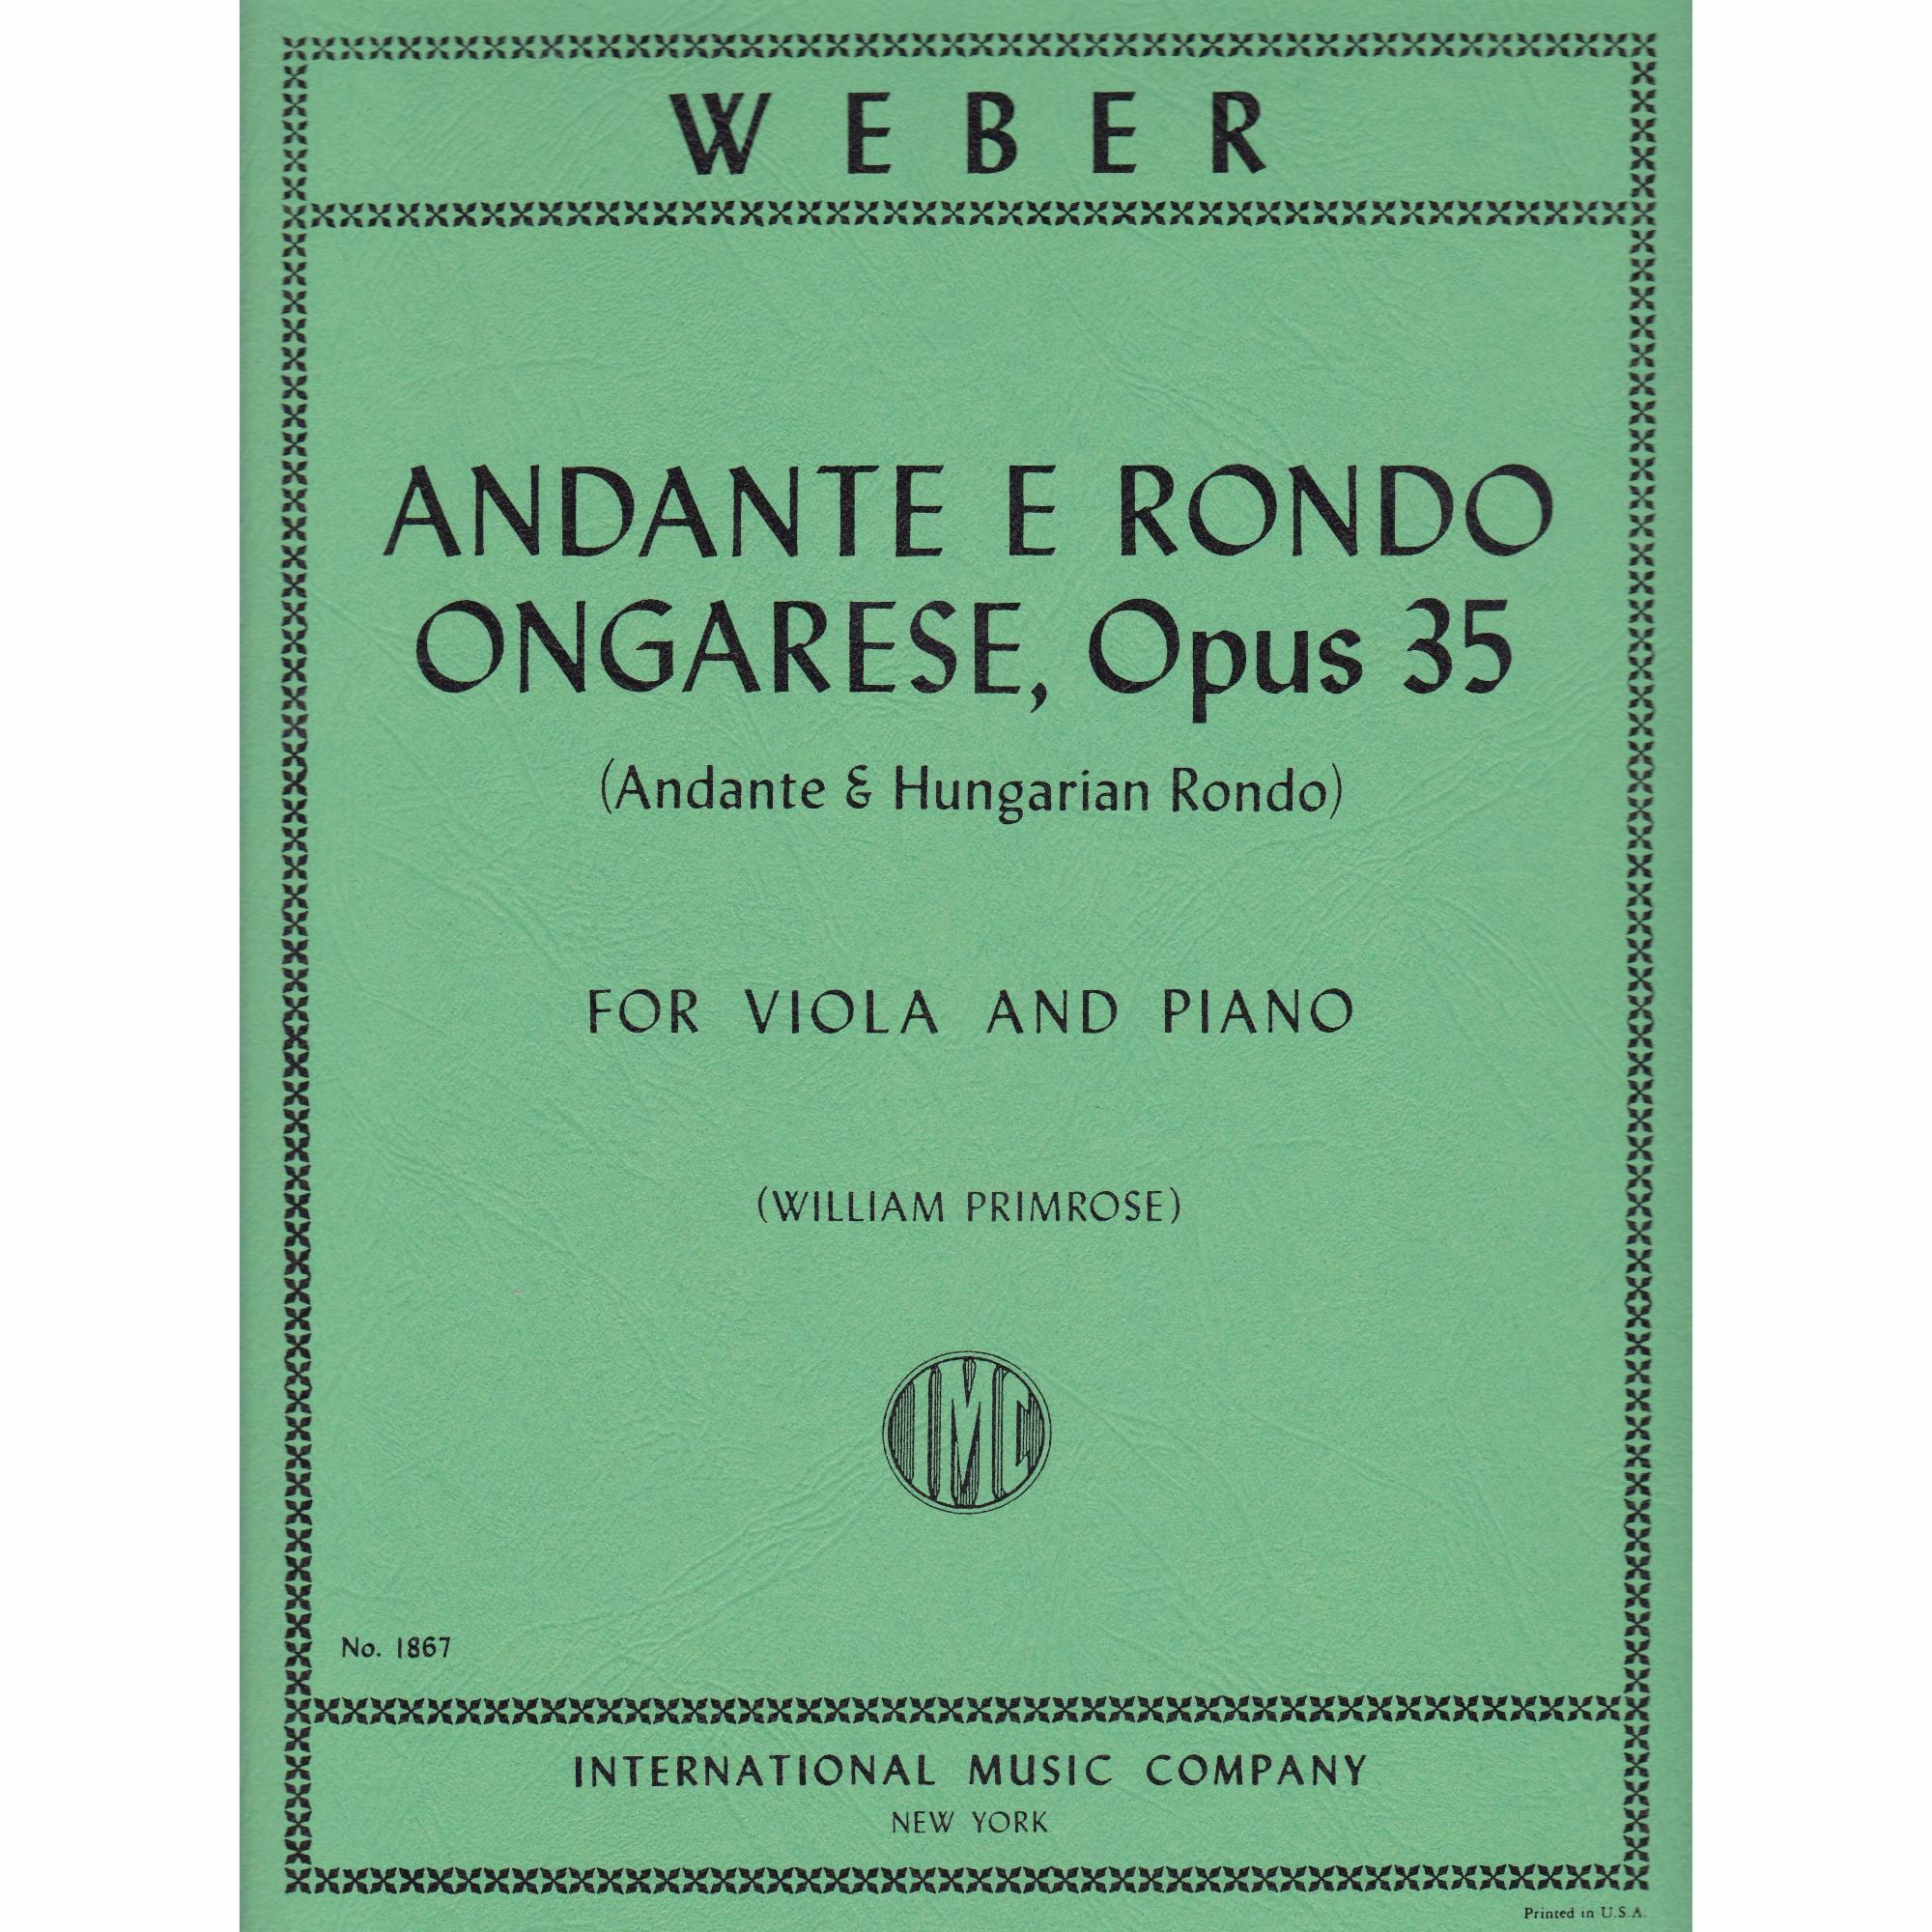 Andante and Hungarian Rondo for Viola and Piano, Op. 35